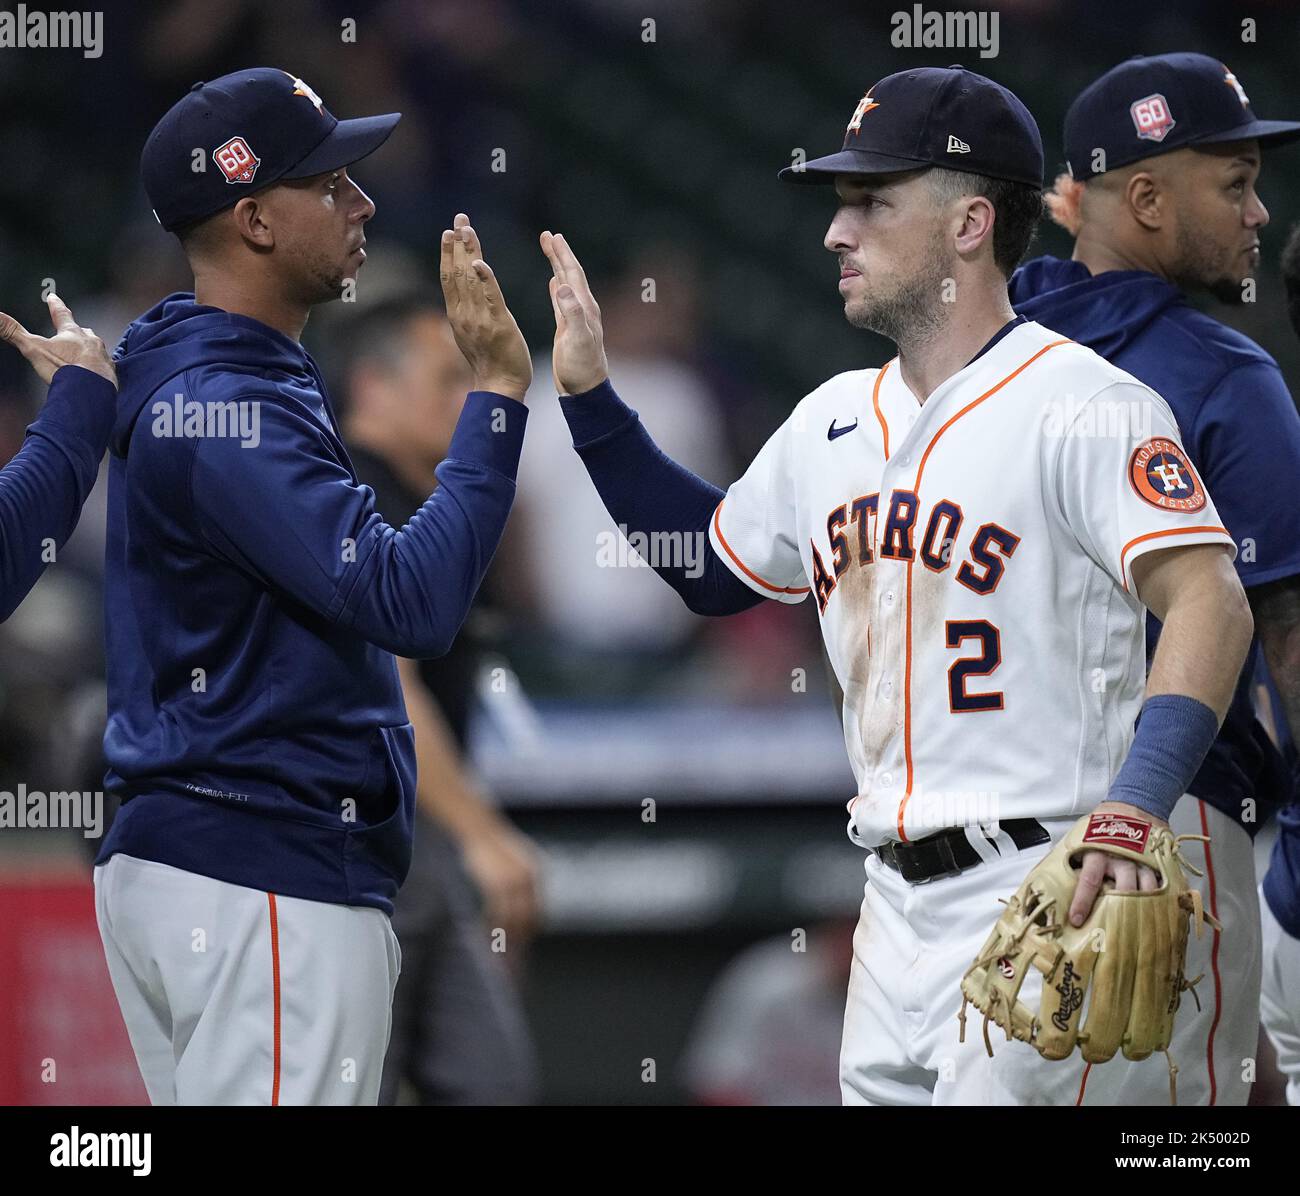 Houston Astros Welcome Back Michael Brantley from Injured List